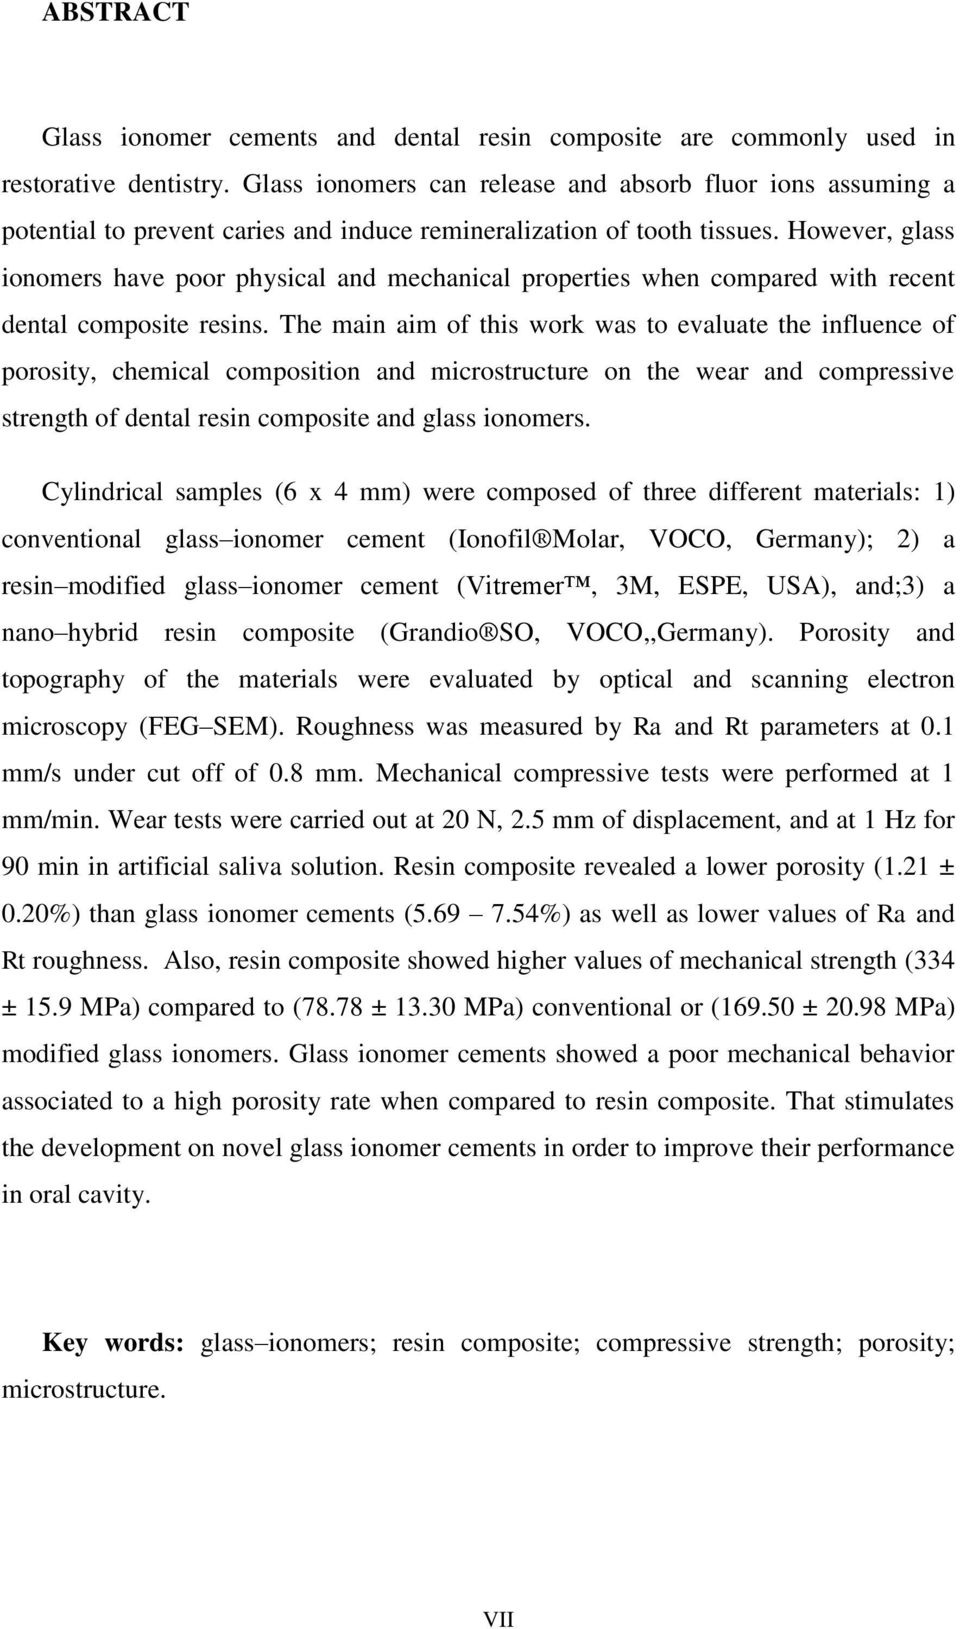 However, glass ionomers have poor physical and mechanical properties when compared with recent dental composite resins.